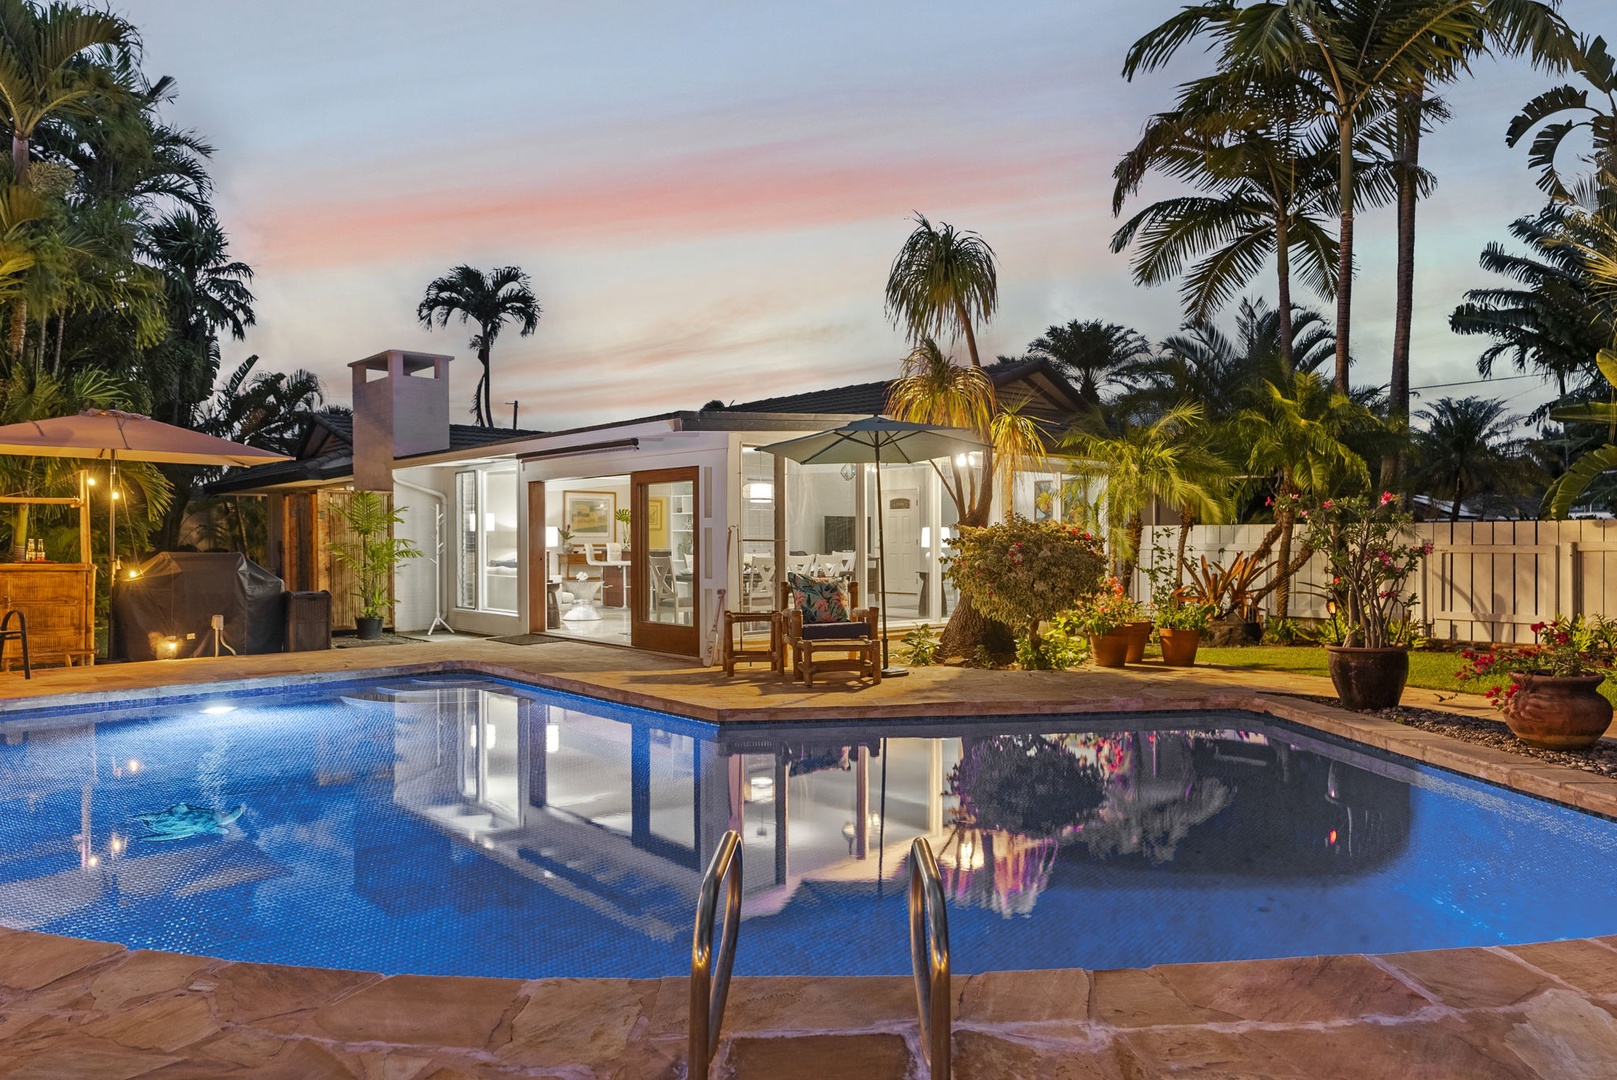 Kailua Vacation Rentals, Hale Aloha - Enchanting evenings await by the shimmering pool under the twilight sky.